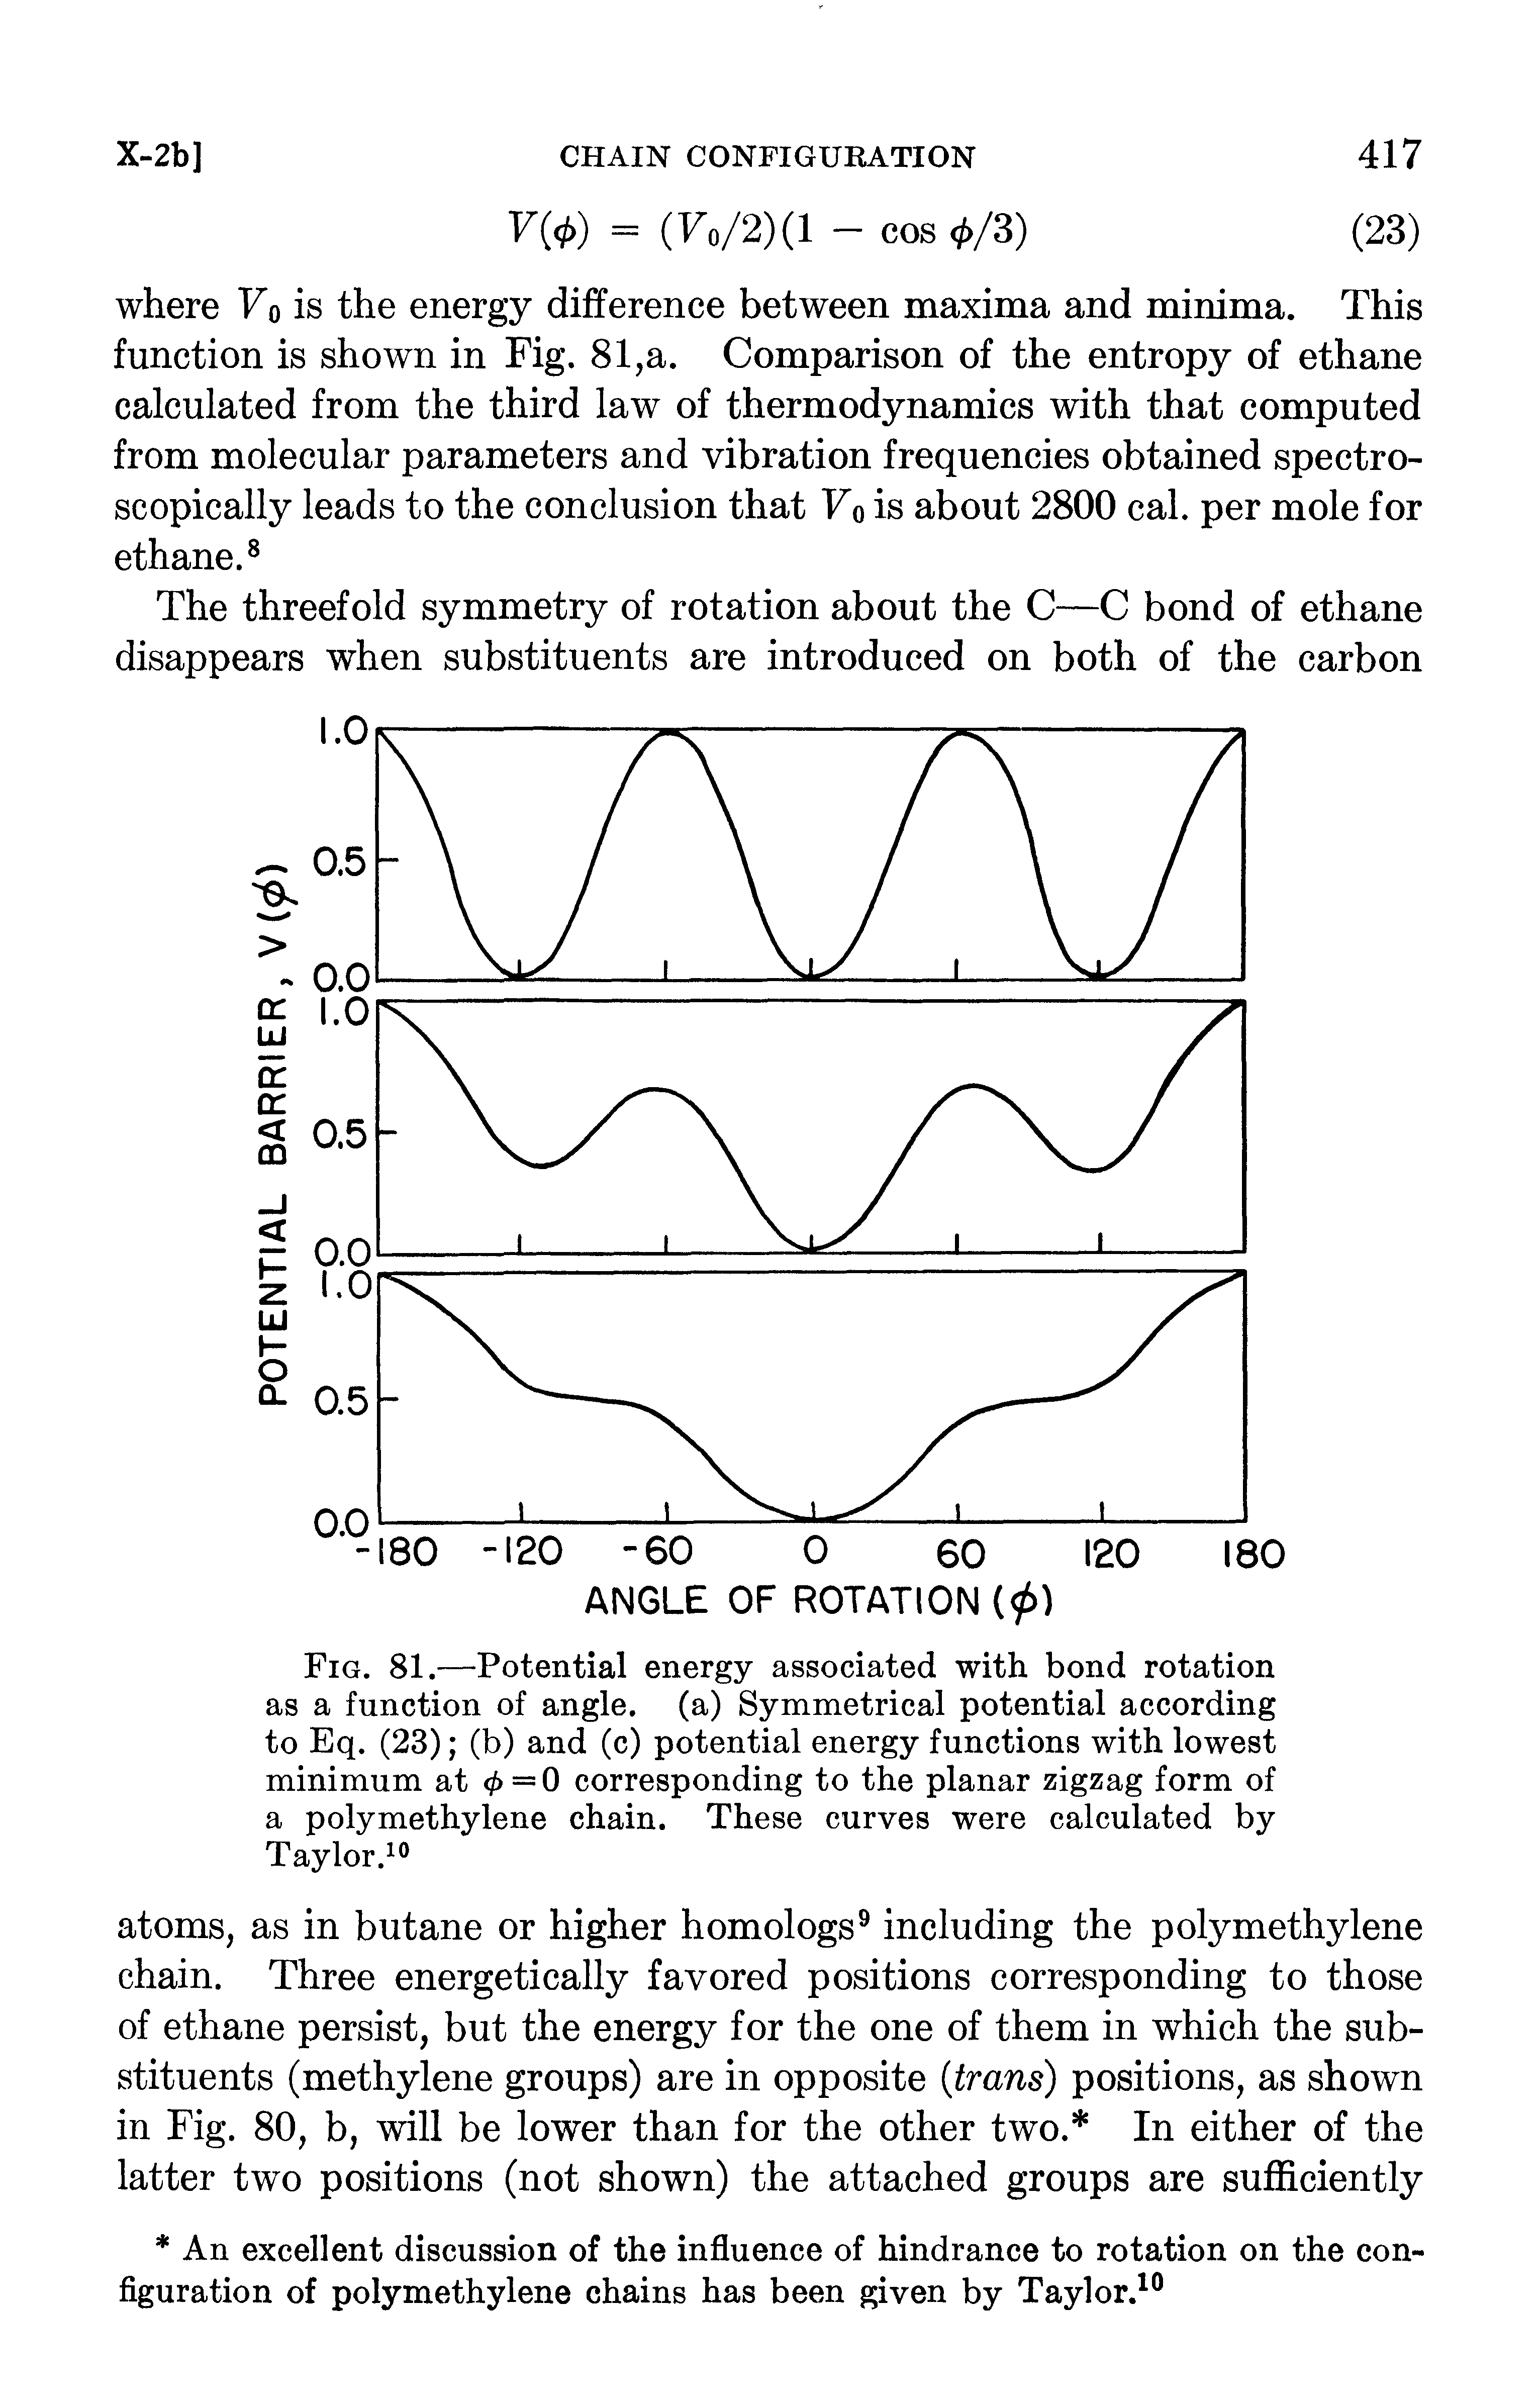 Fig. 81.—Potential energy associated with bond rotation as a function of angle, (a) Symmetrical potential according to Eq. (23) (b) and (c) potential energy functions with lowest minimum at 0=0 corresponding to the planar zigzag form of a polymethylene chain. These curves were calculated by Taylor. 0...